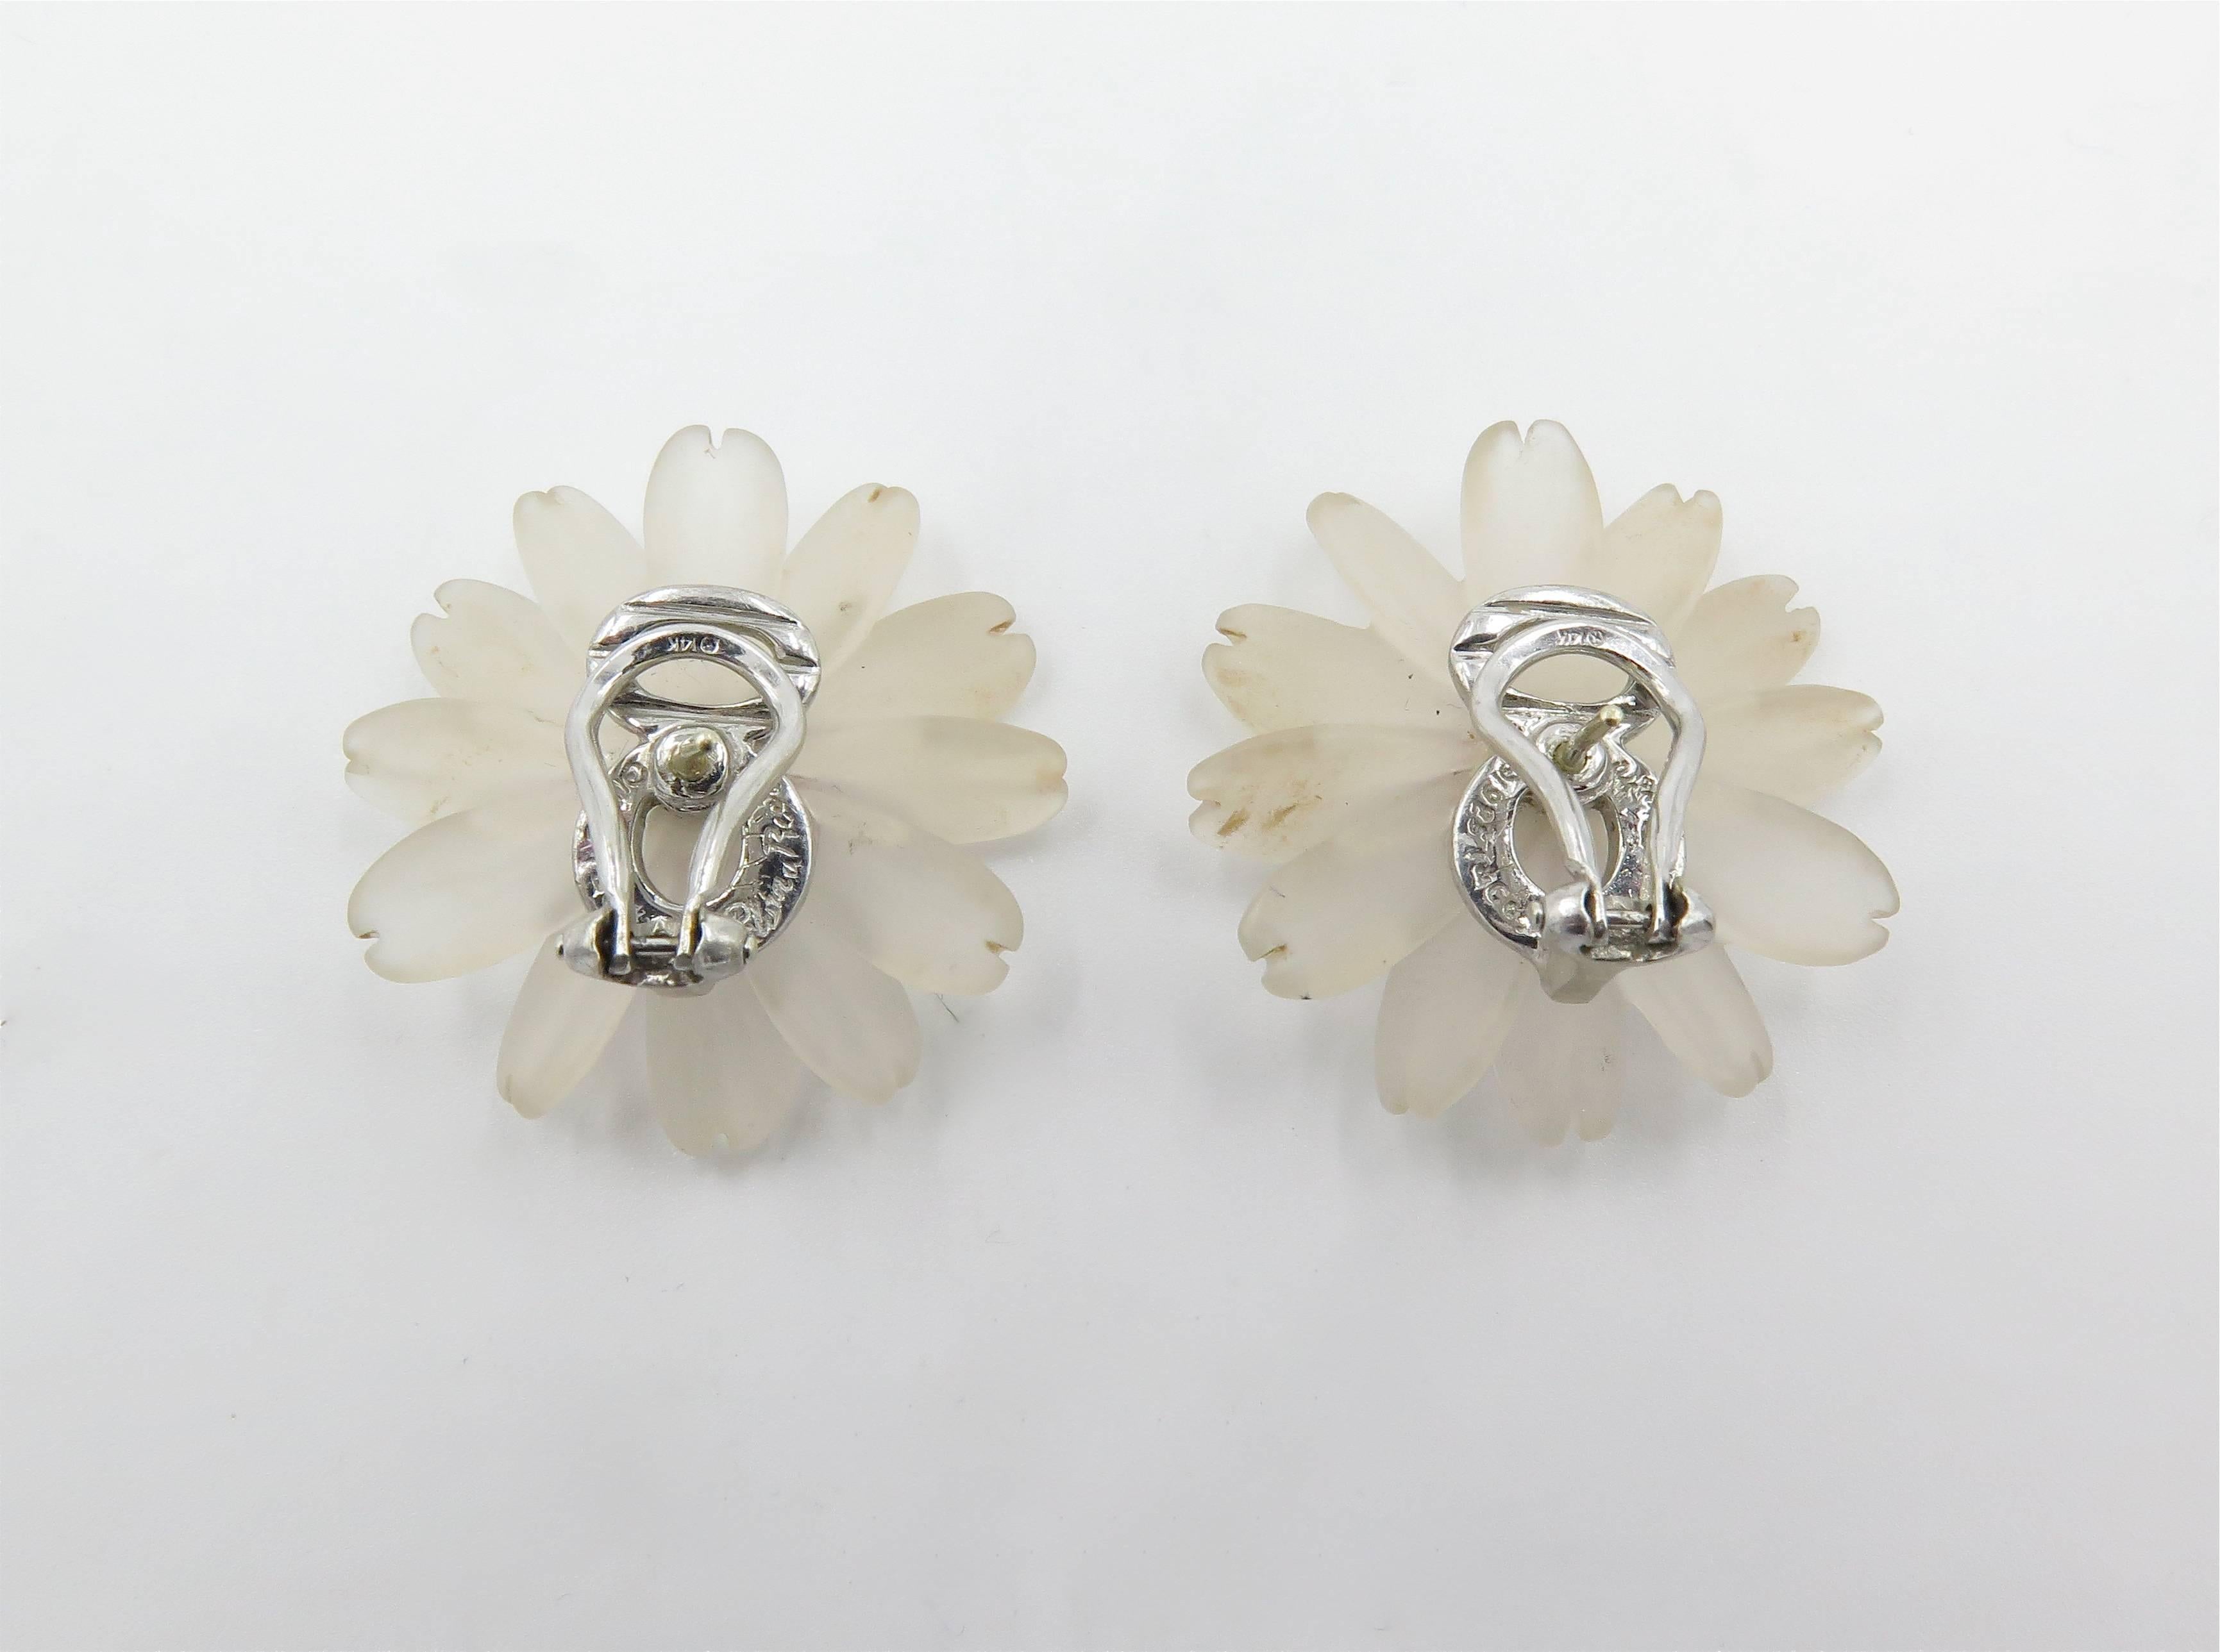 A pair of 14 karat white gold, frosted rock crystal and pink tourmaline flower earrings. Paloma Picasso, Tiffany & Co. 1983. Each designed as a carved frosted rock crystal flower head, centering a triangular cut tourmaline sapphire. Diameter is